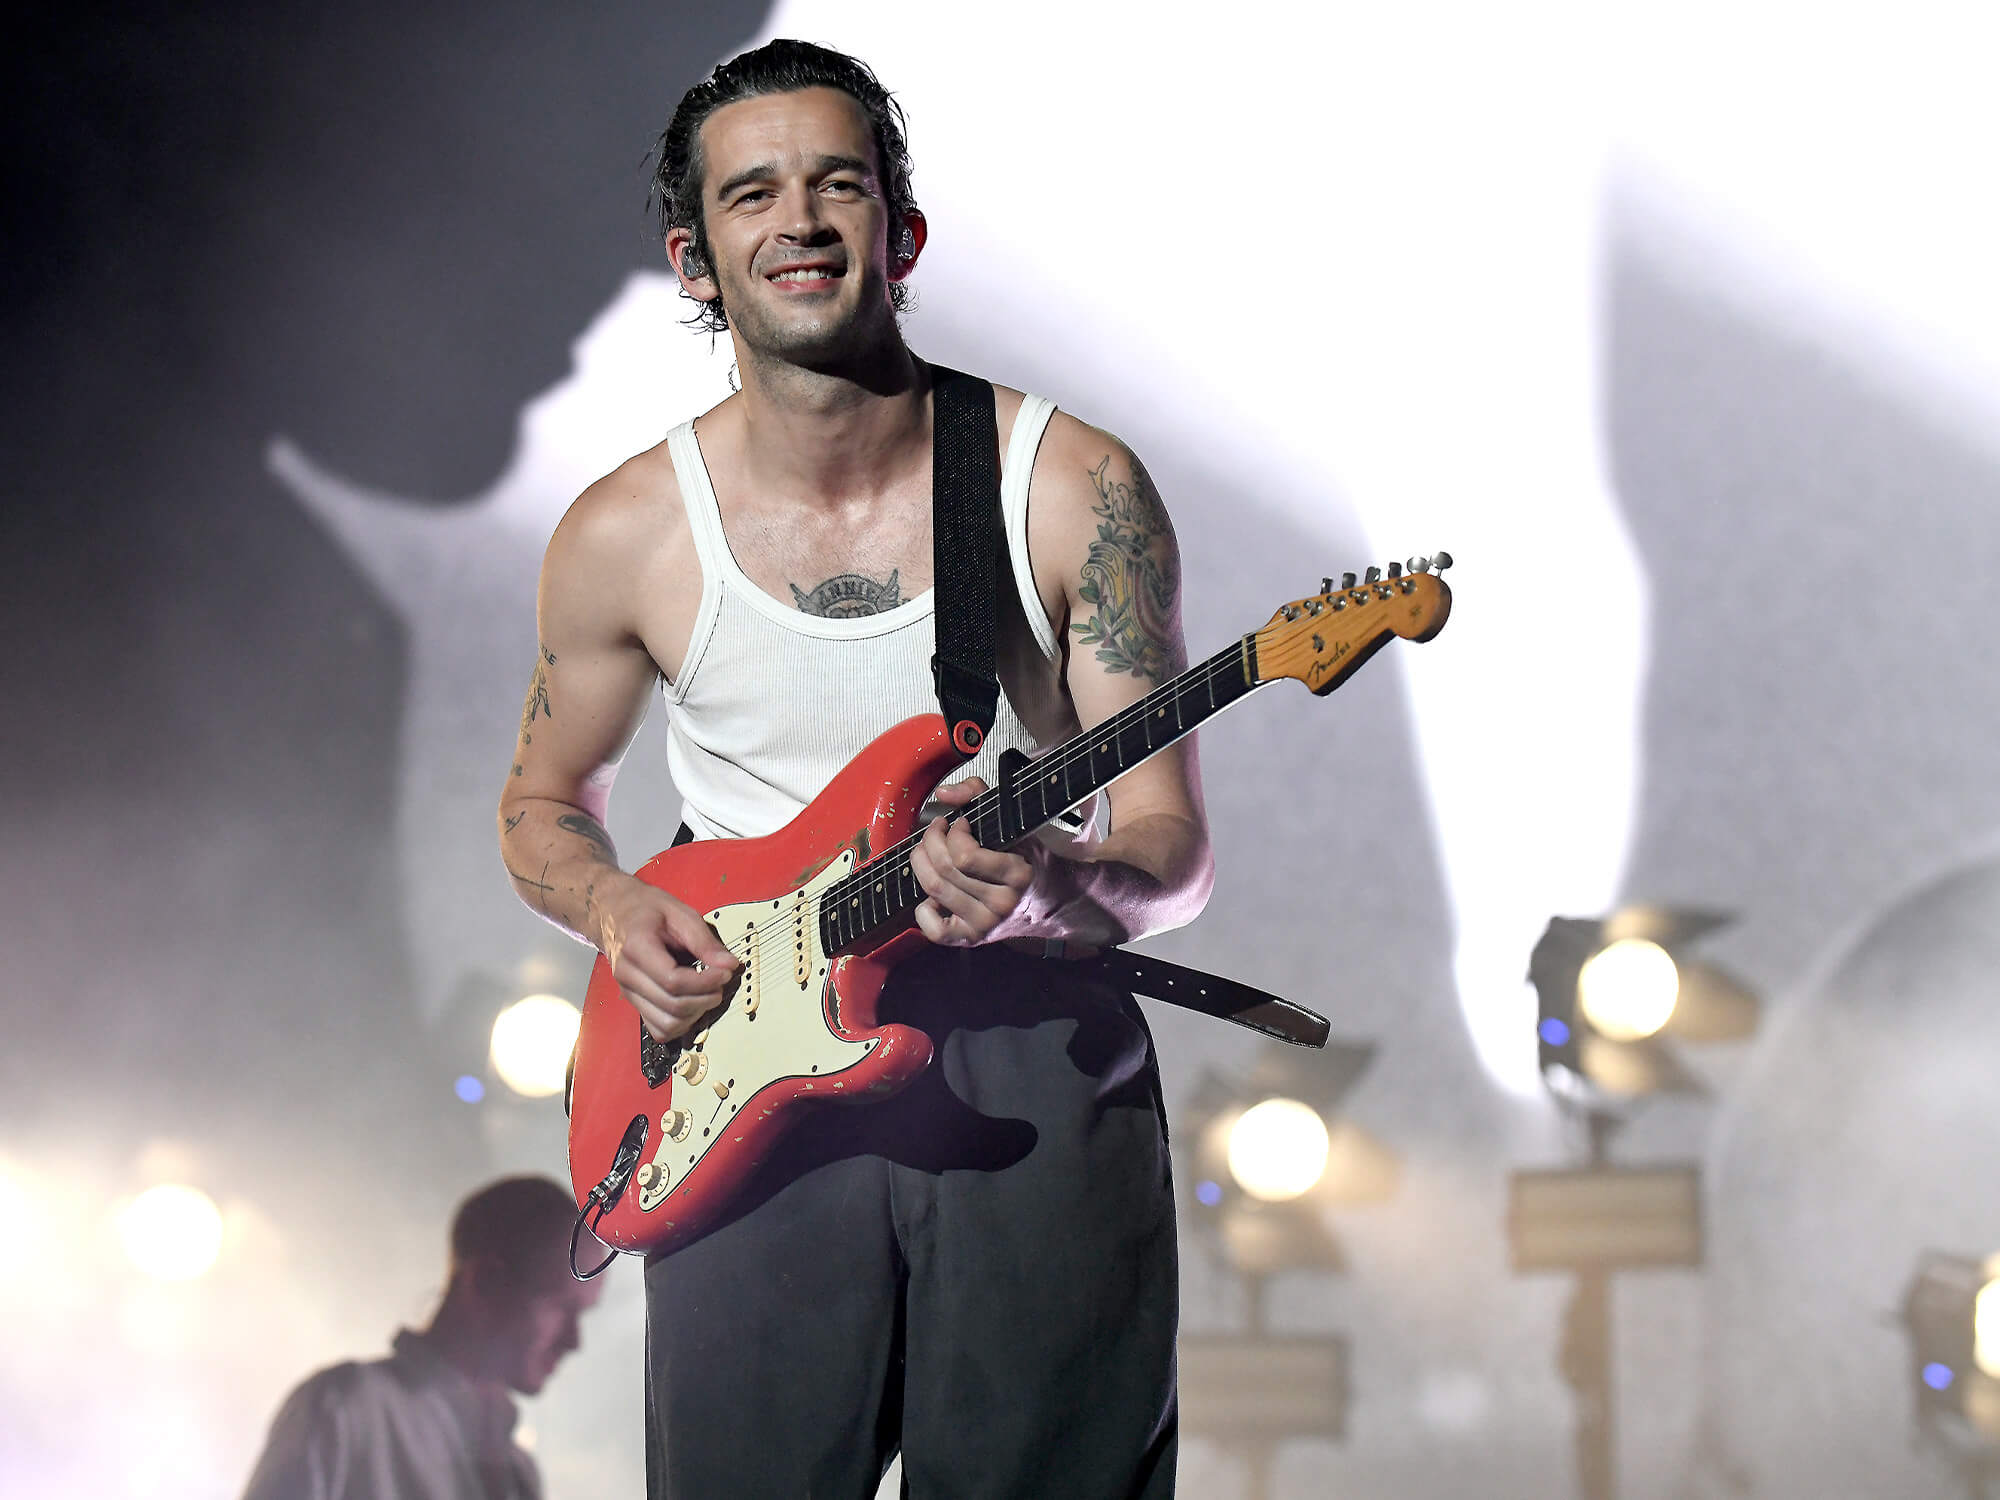 Matty Healy playing a red Strat and smiling at the crowd